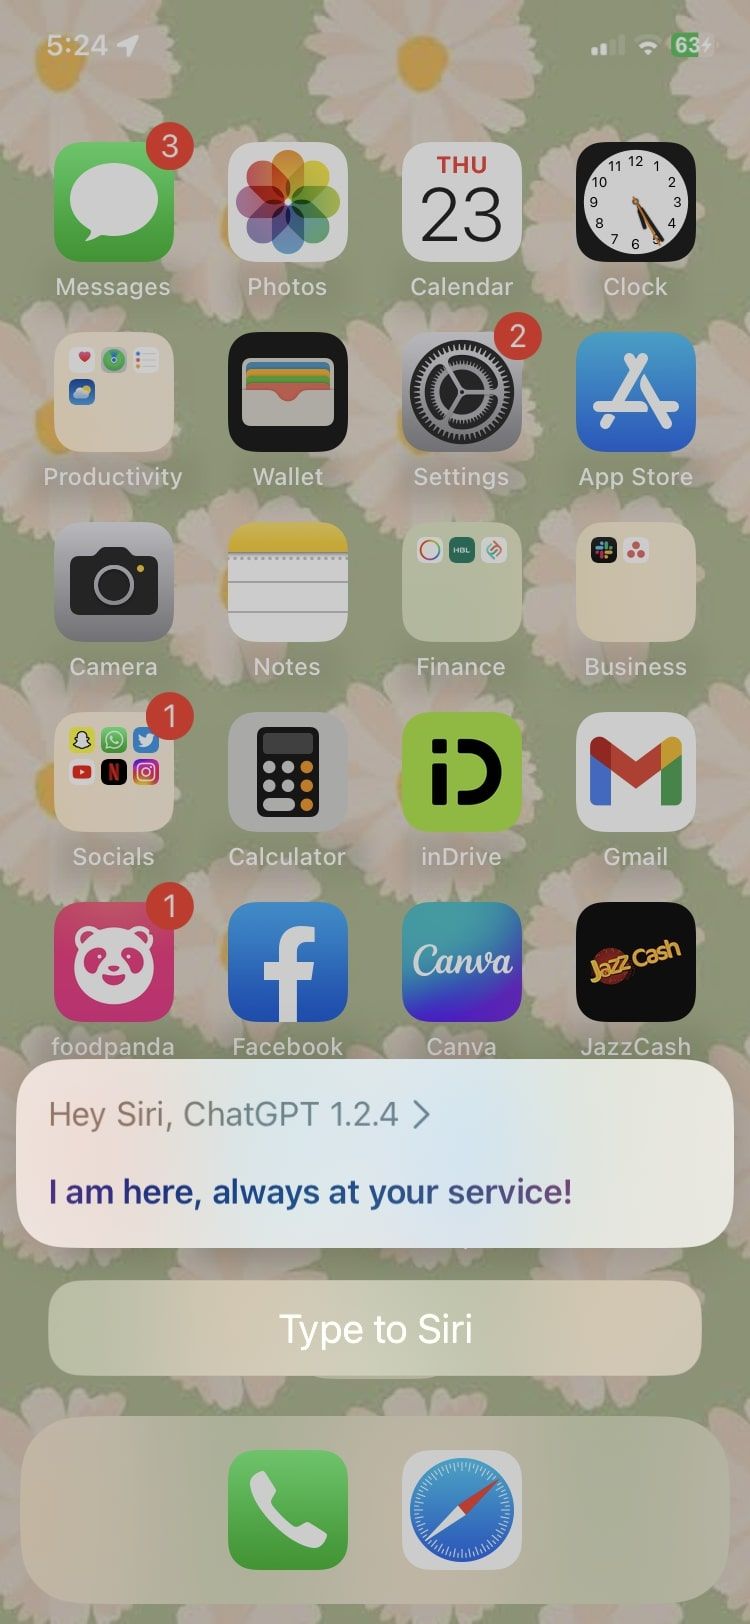 ChatGPT launched with siri